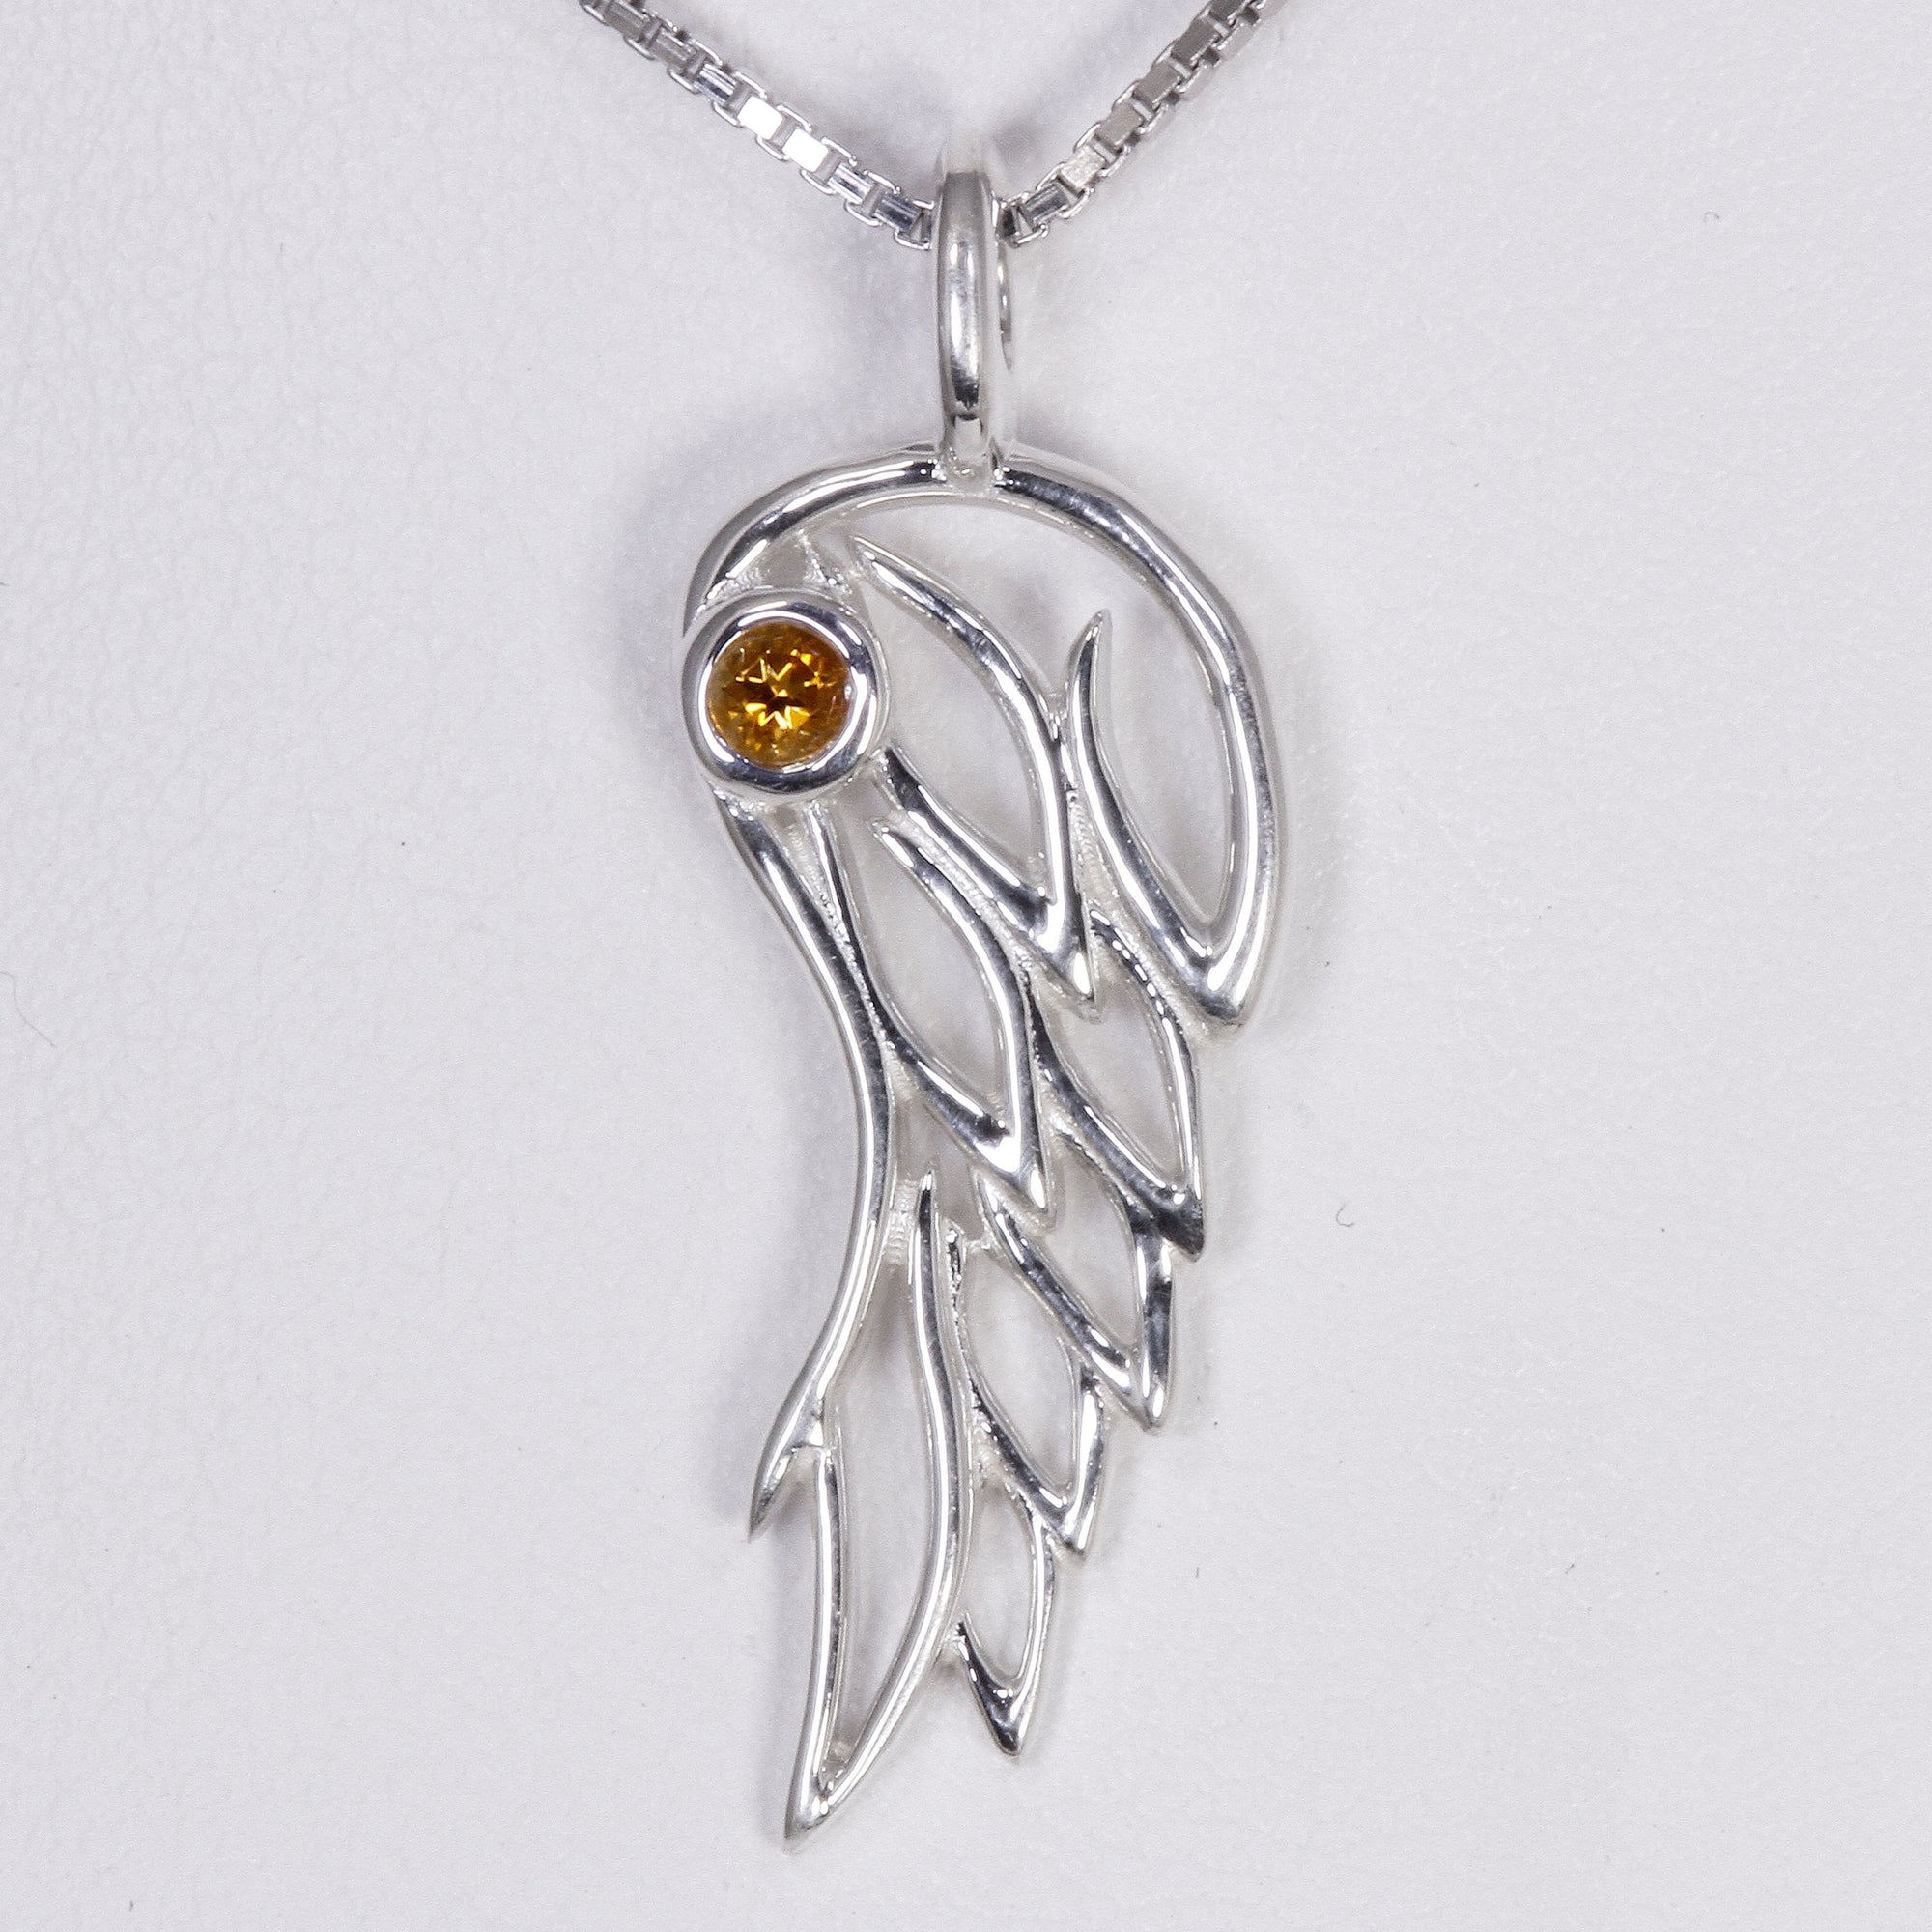 Angel Wing Pendant Sterling Silver with Citrine